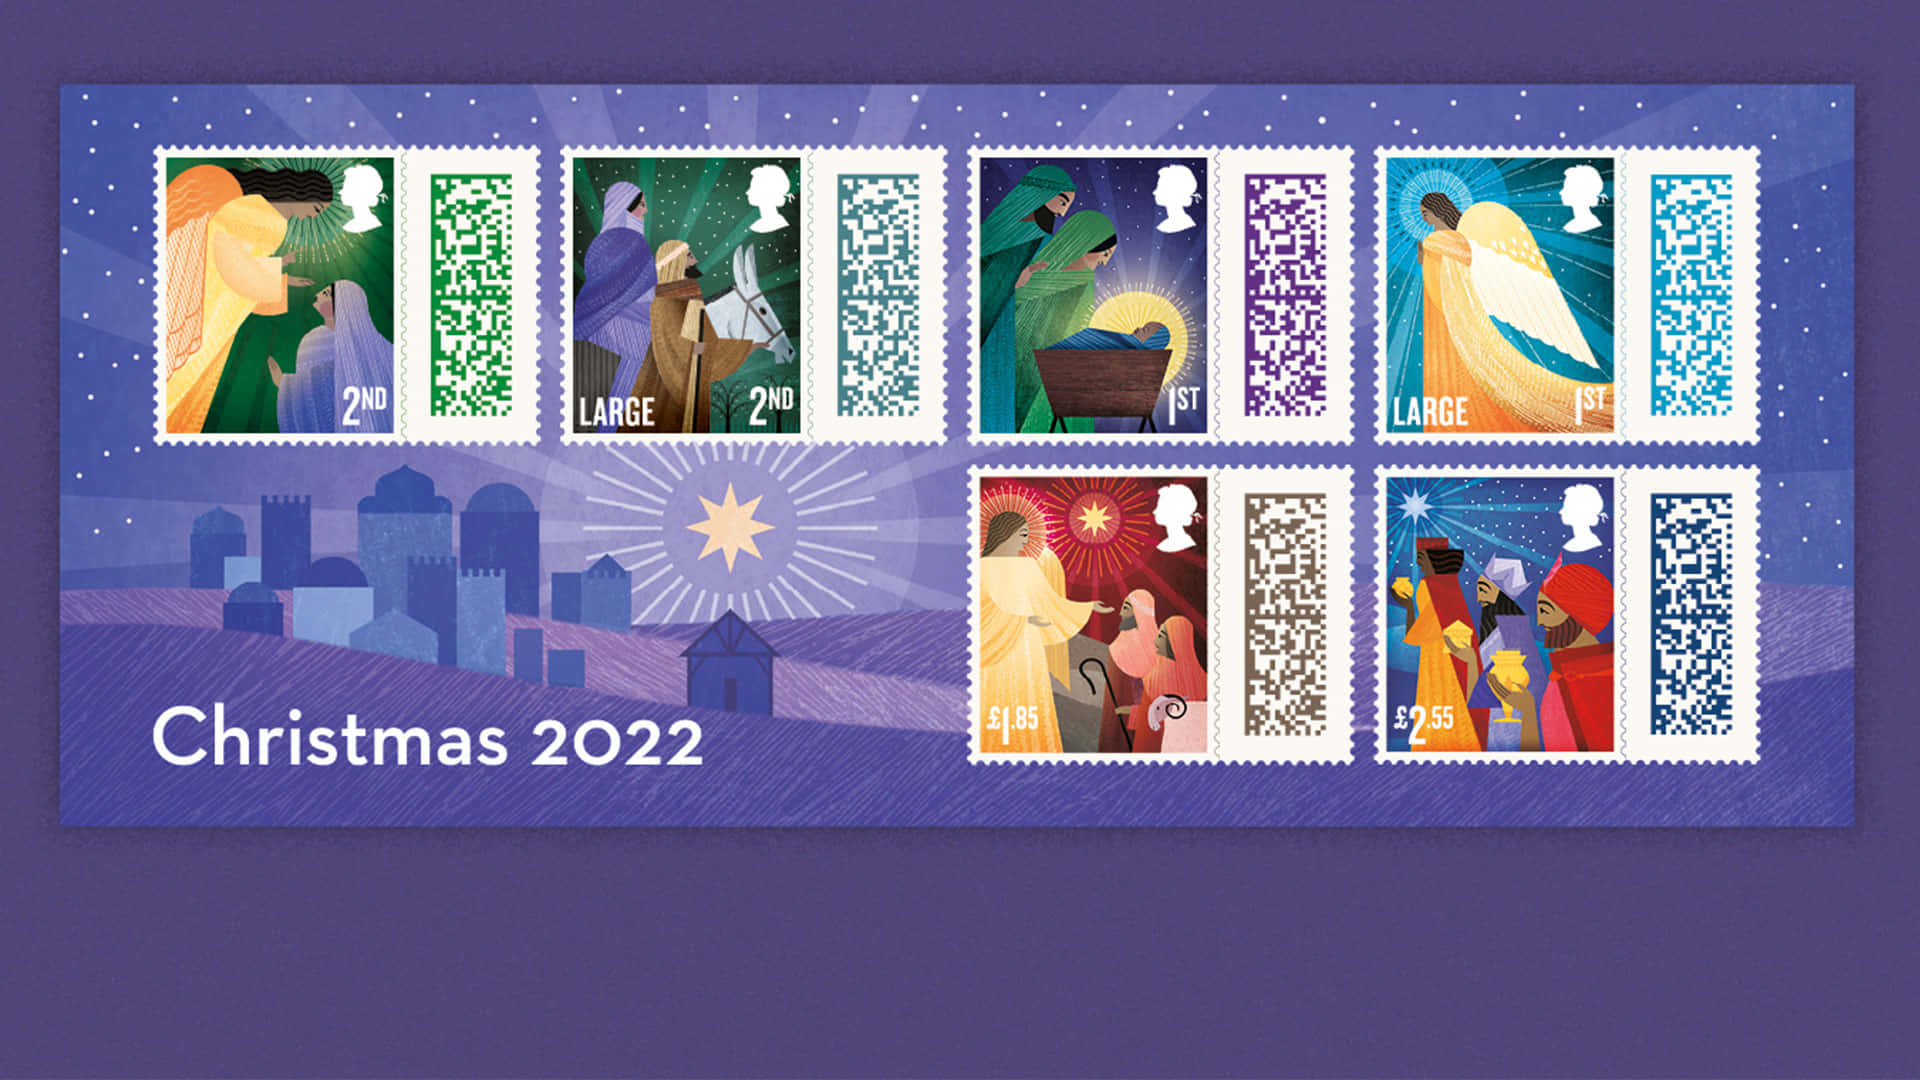 A Christmas Postage Stamp With A Nativity Scene